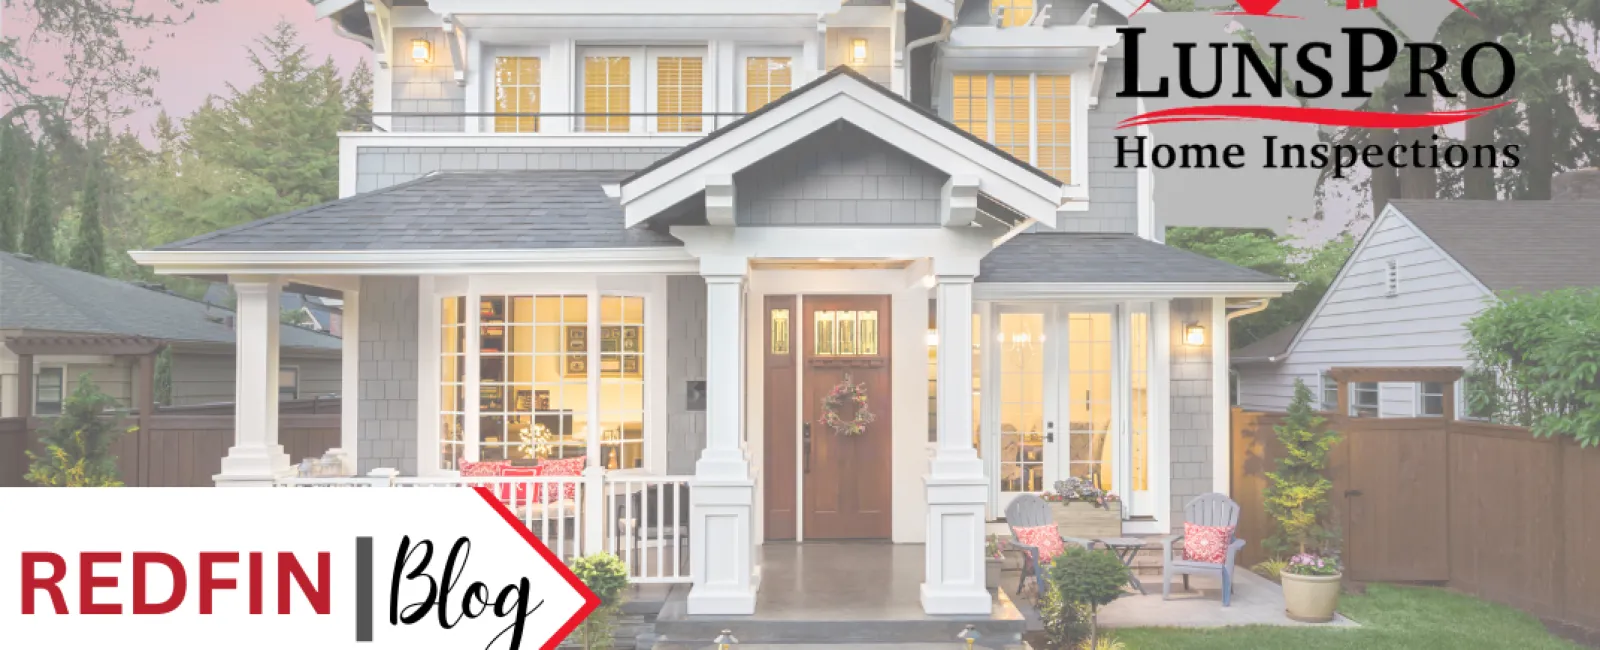 REDFIN BLOG ARTICLE 19 TYPES OF HOME INSPECTIONS